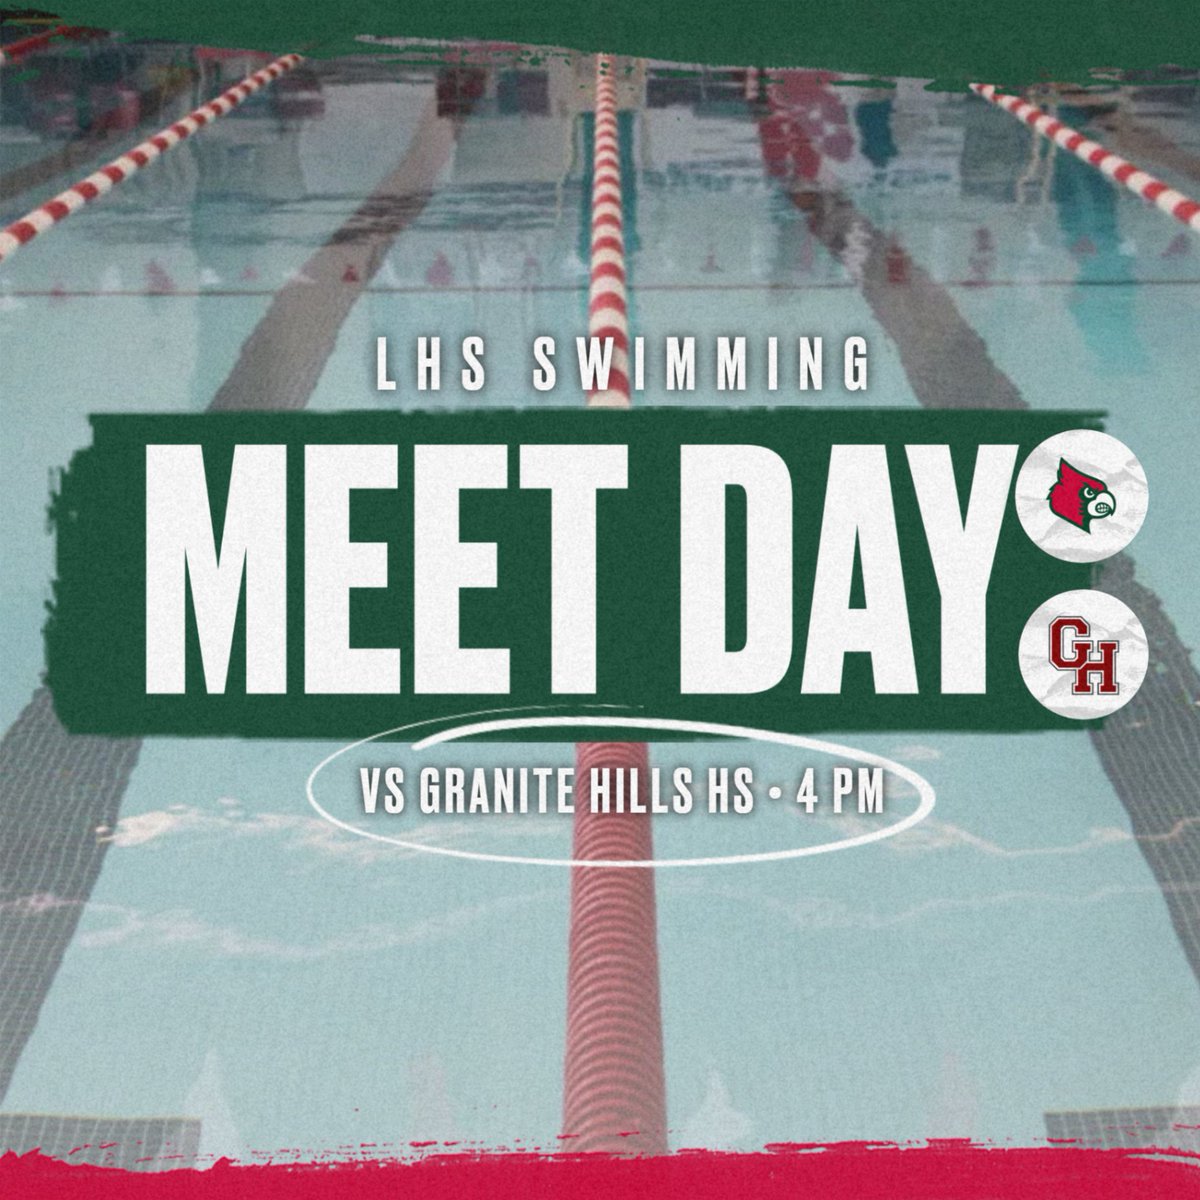 Come support LHS Swim as they have their first HOME swim meet! #GoCardinals

🆚Granite Hills High School 
⏰ 4:00 pm 
📍 Lindsay Aquatic Center